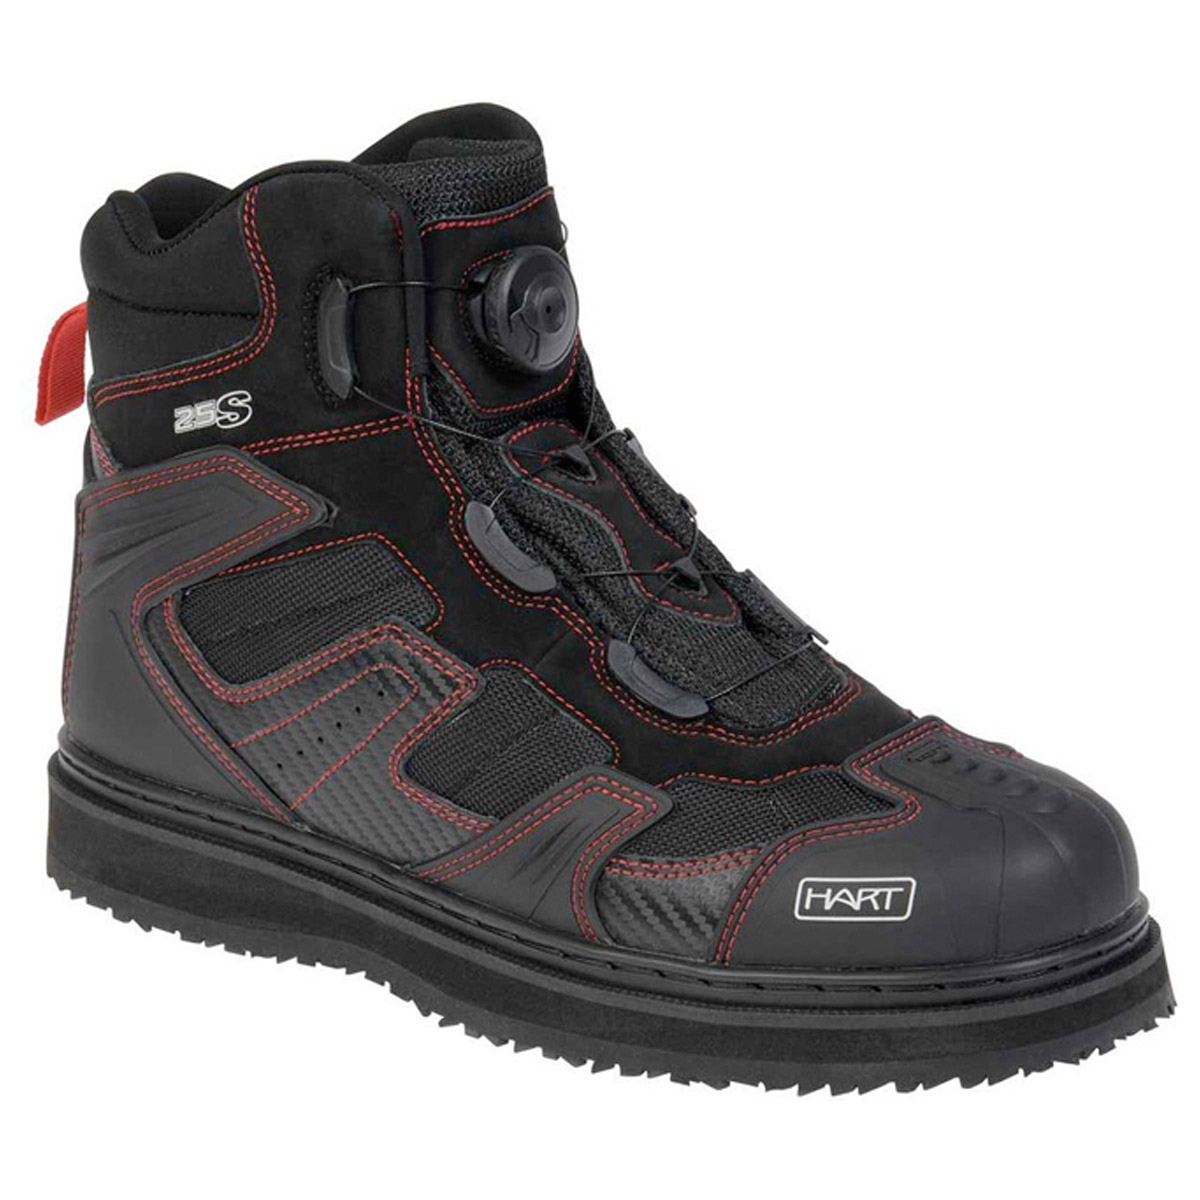 Hart Wading Boots 25S Pro -  40-41 -  42-43 -  44-45 -  46-47